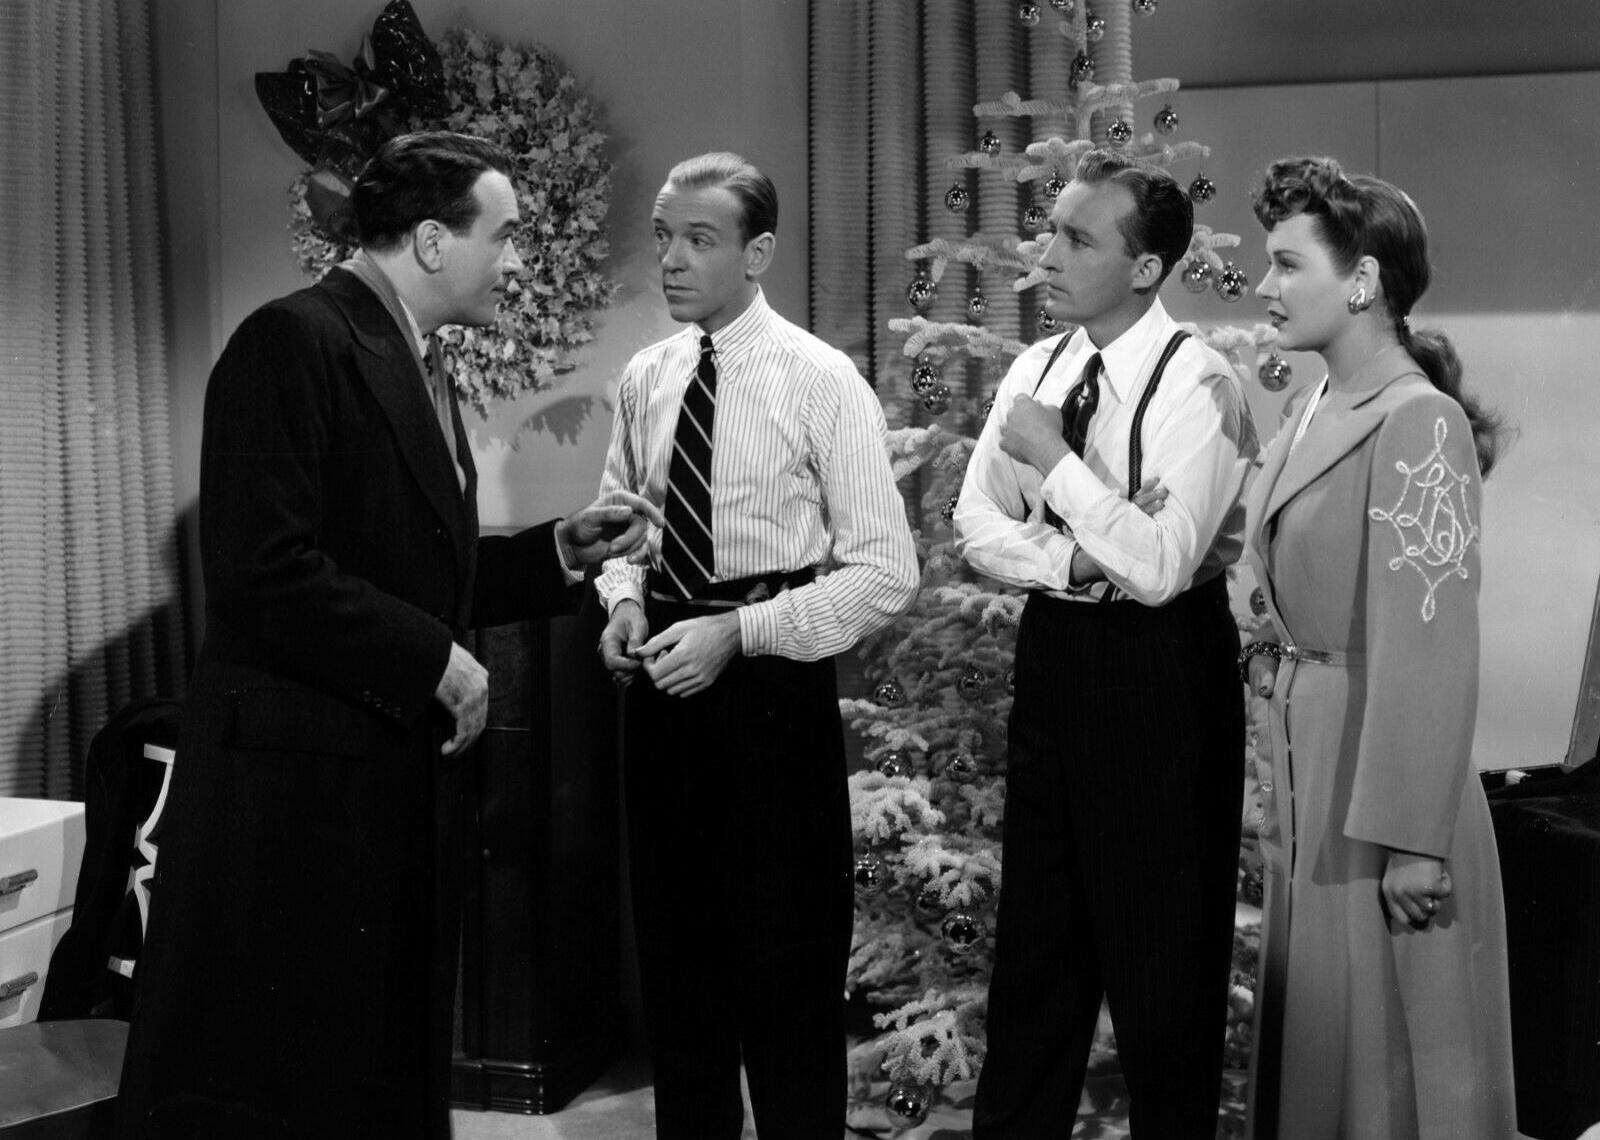 Fred Astaire and Bing Crosby talking with a man and woman in front of Christmas trees.